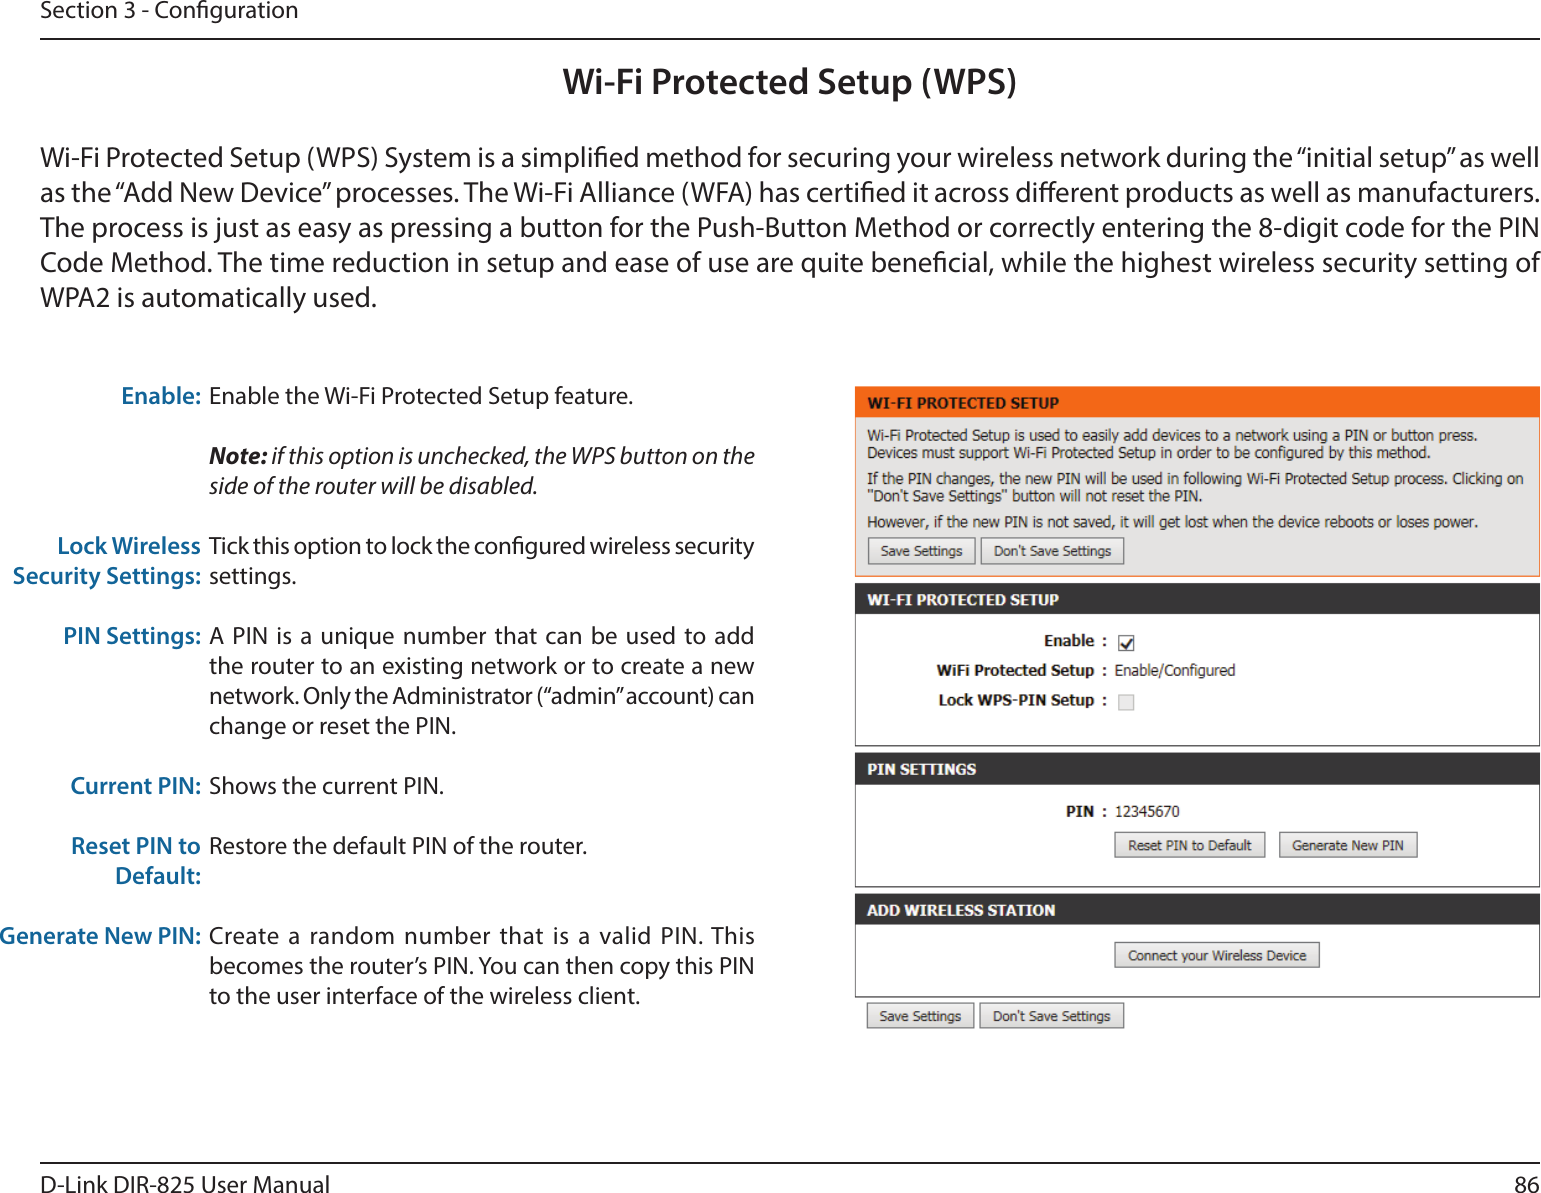 86D-Link DIR-825 User ManualSection 3 - CongurationWi-Fi Protected Setup (WPS)Enable the Wi-Fi Protected Setup feature. Note: if this option is unchecked, the WPS button on the side of the router will be disabled.Tick this option to lock the congured wireless security settings.A PIN is a unique number that can be used to add the router to an existing network or to create a new network. Only the Administrator (“admin” account) can change or reset the PIN. Shows the current PIN. Restore the default PIN of the router. Create a random number that is a valid PIN. This becomes the router’s PIN. You can then copy this PIN to the user interface of the wireless client.Enable:Lock Wireless Security Settings:PIN Settings:Current PIN:Reset PIN to Default:Generate New PIN:Wi-Fi Protected Setup (WPS) System is a simplied method for securing your wireless network during the “initial setup” as well as the “Add New Device” processes. The Wi-Fi Alliance (WFA) has certied it across dierent products as well as manufacturers. The process is just as easy as pressing a button for the Push-Button Method or correctly entering the 8-digit code for the PIN Code Method. The time reduction in setup and ease of use are quite benecial, while the highest wireless security setting of WPA2 is automatically used.